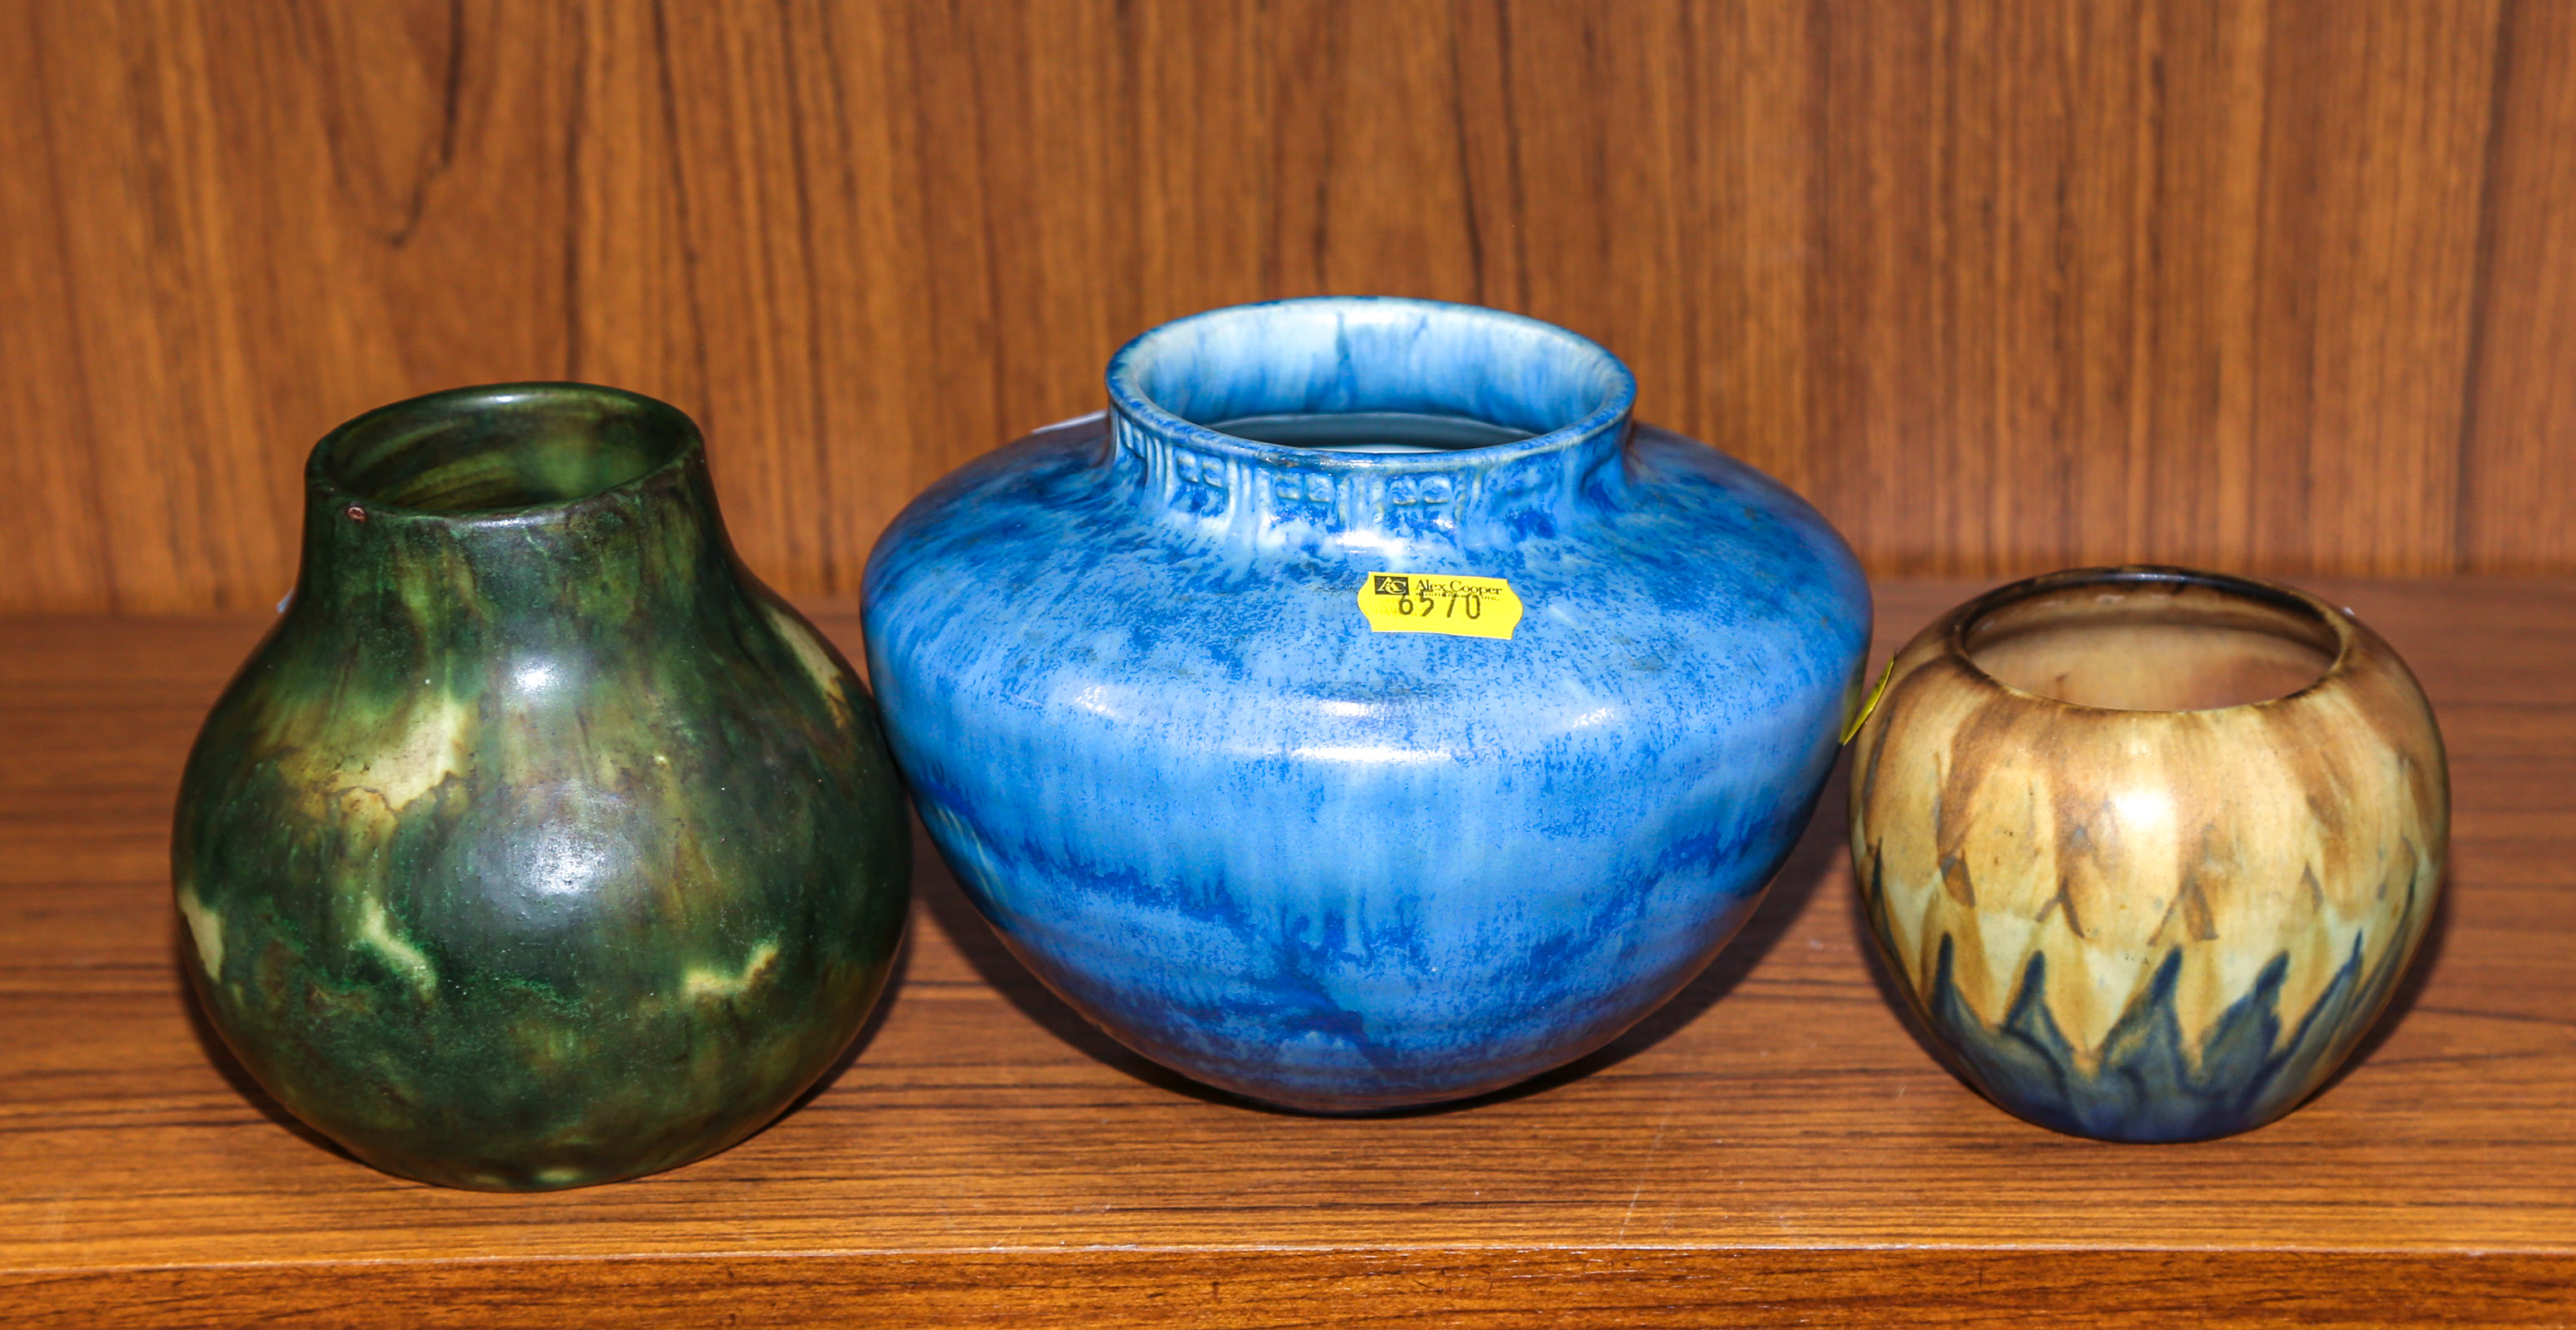 THREE PIECES OF AMERICAN ART POTTERY